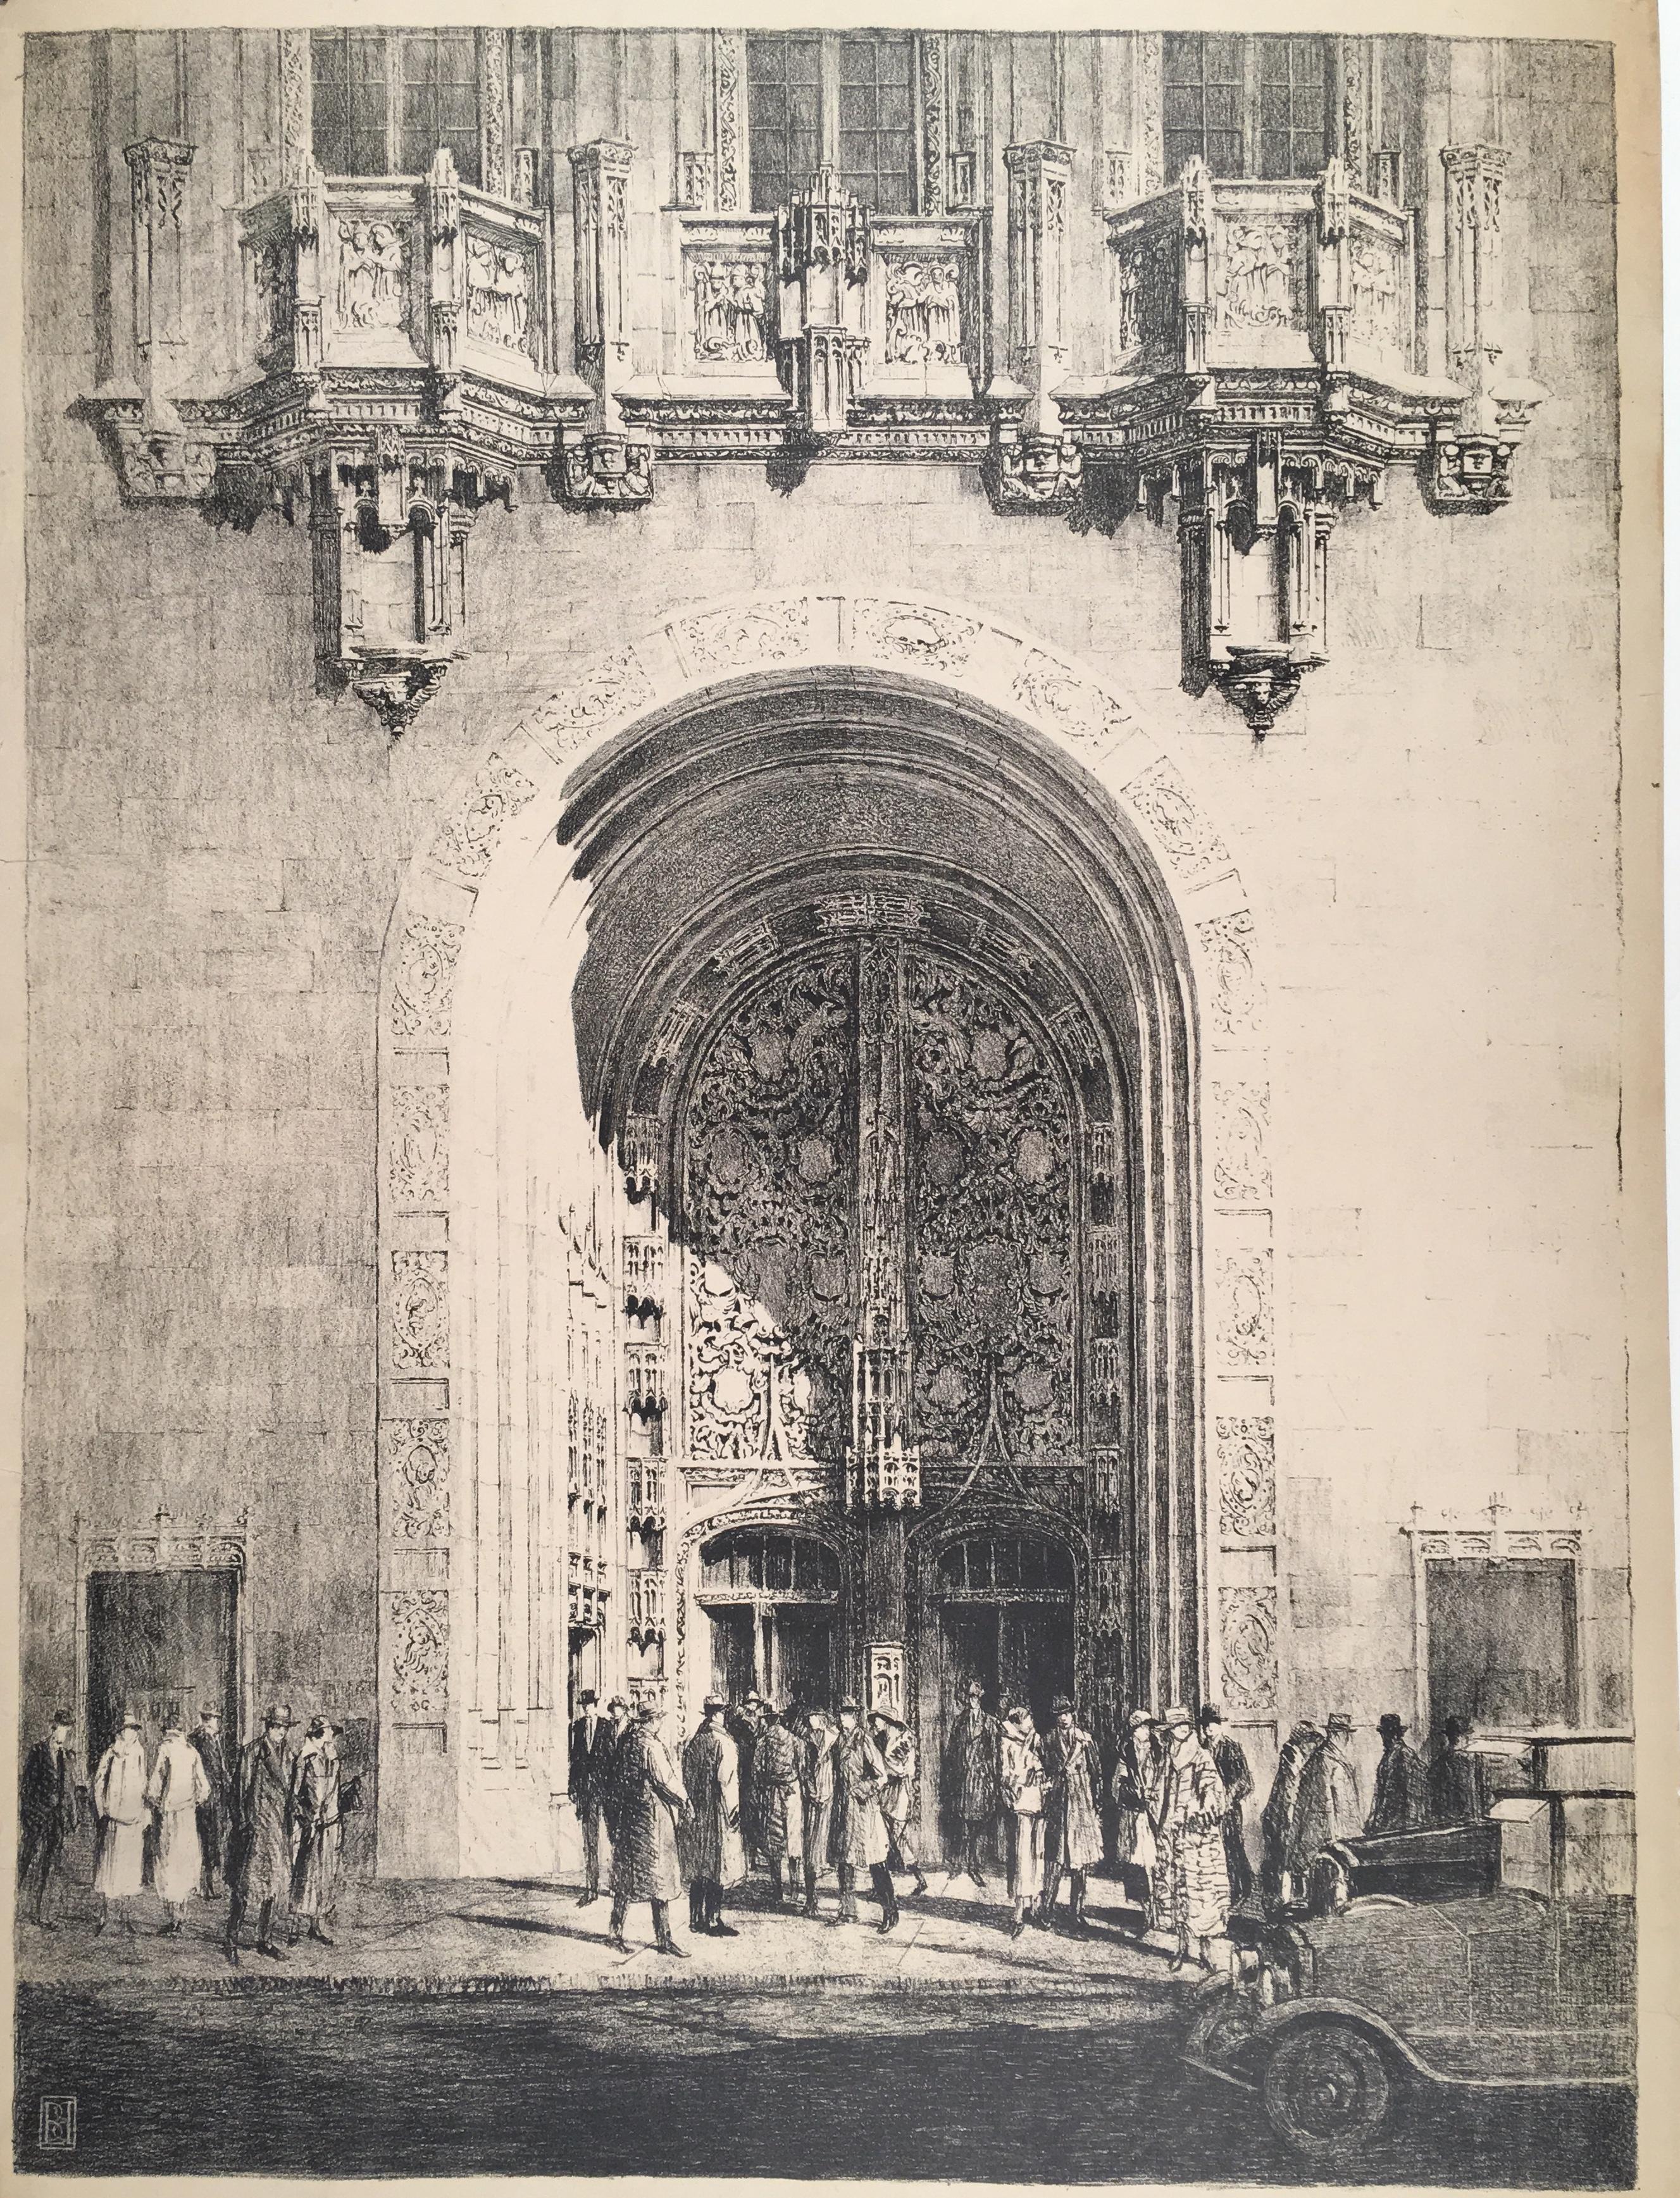 Unknown Landscape Print - Chicago Tribune Tower (The Aesop's Screen Facade)